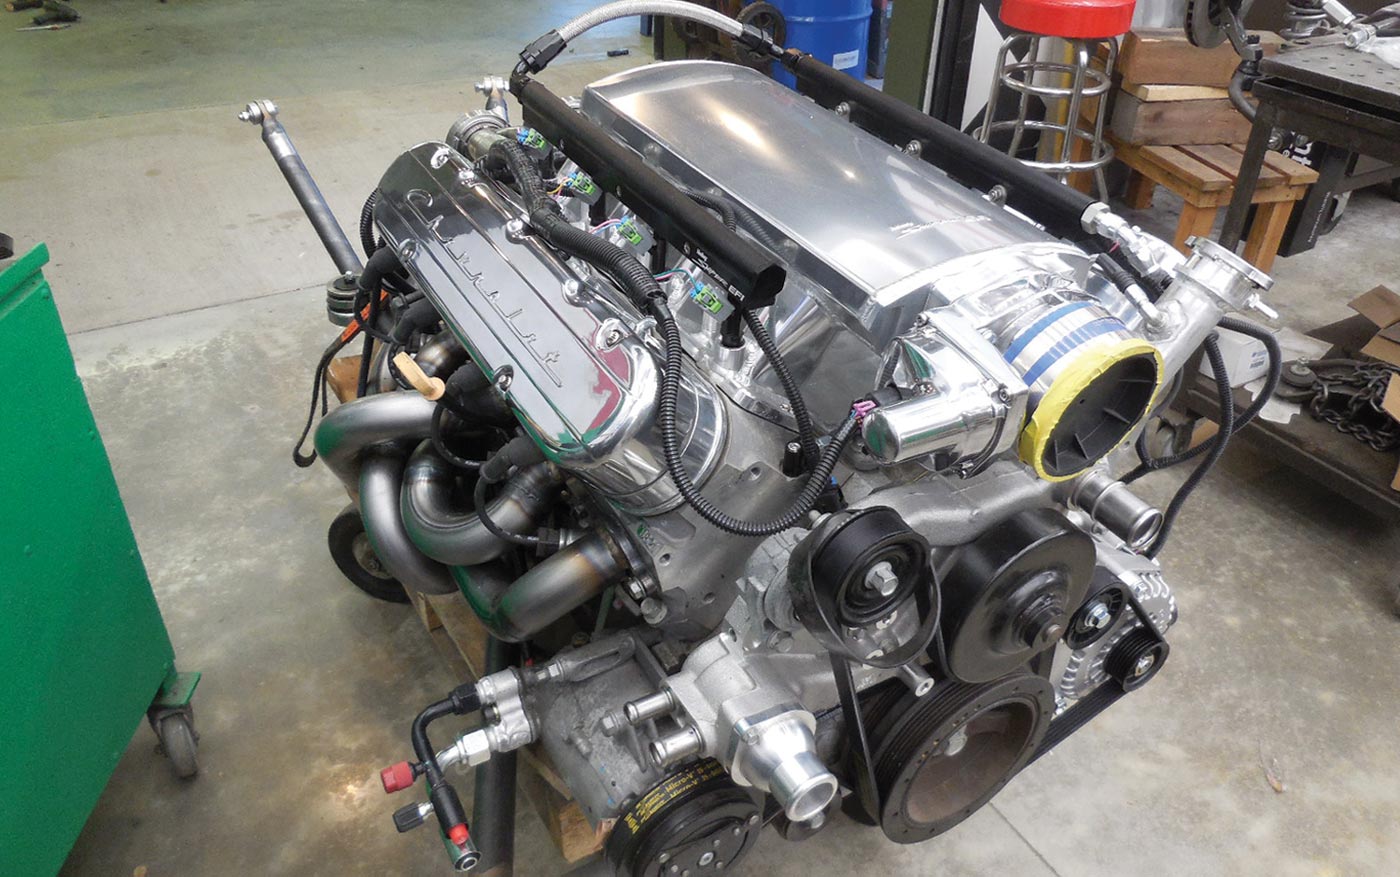 the LS3 with a Holley Sniper intake and their vintage-style valve cov- ers along with a Comp Cams camshaft and kit